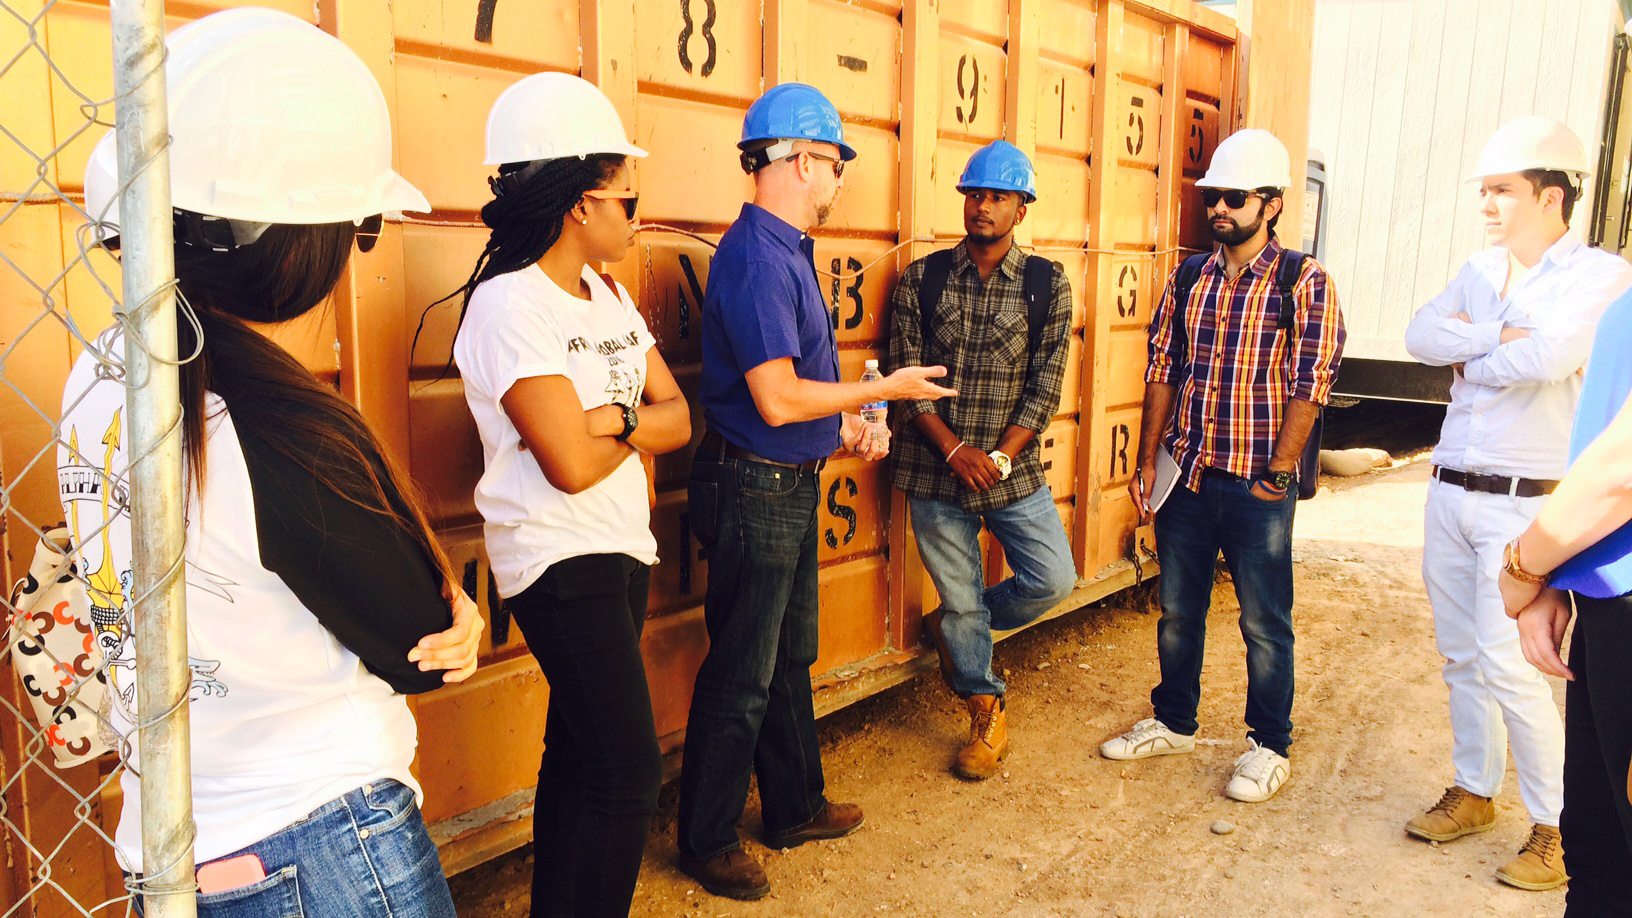 A group of students listens to an industry professional at a construction site